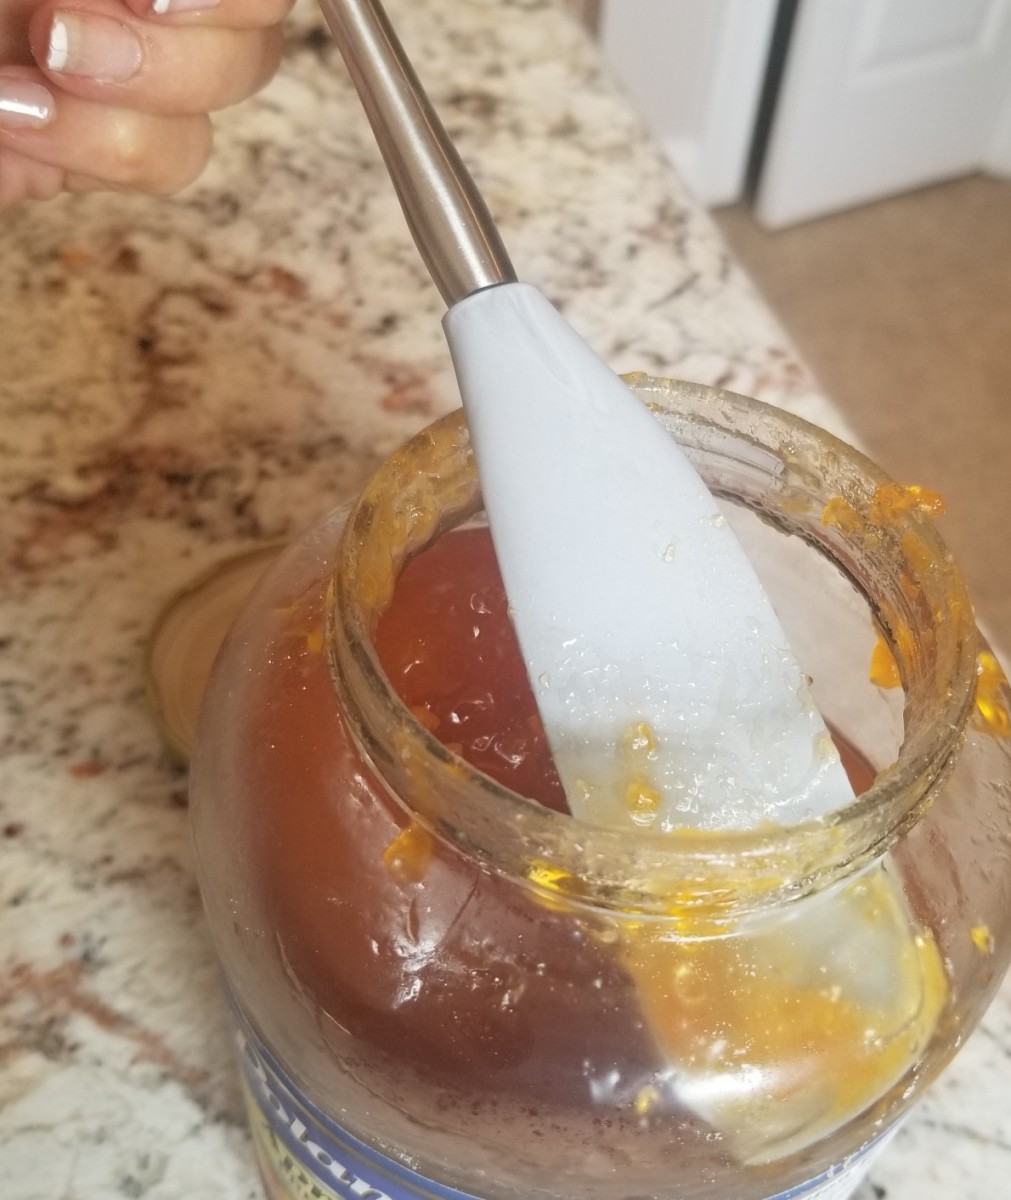 This Flex-Core Jar Spatula with Stainless Steel Handle from Sur La Table fits into narrow jars and helps me spread jam on dough easily.